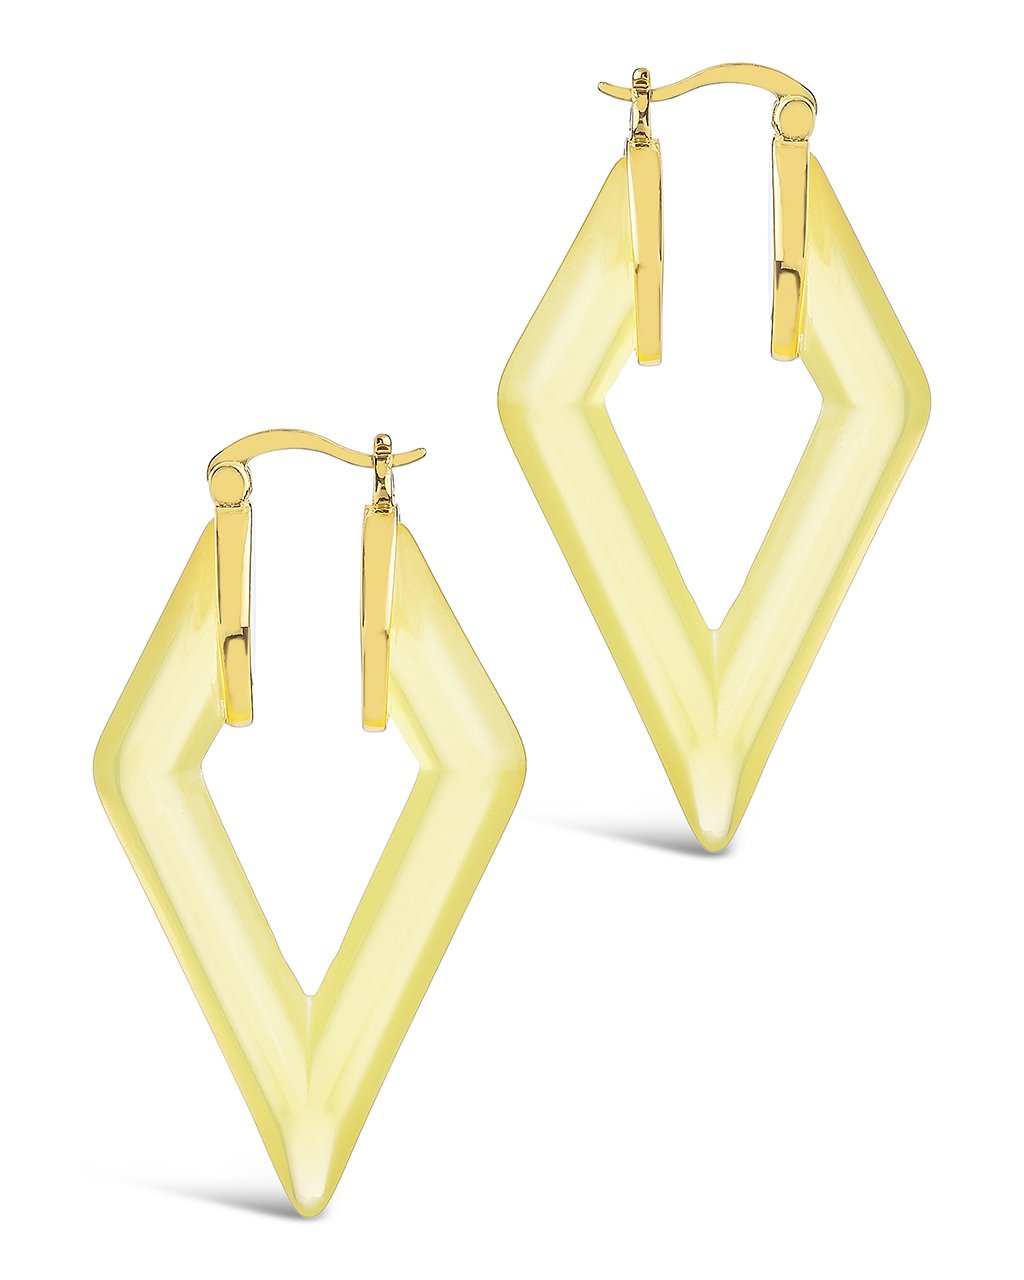 Lucite Diamond Hoops Earring Sterling Forever Gold Canary